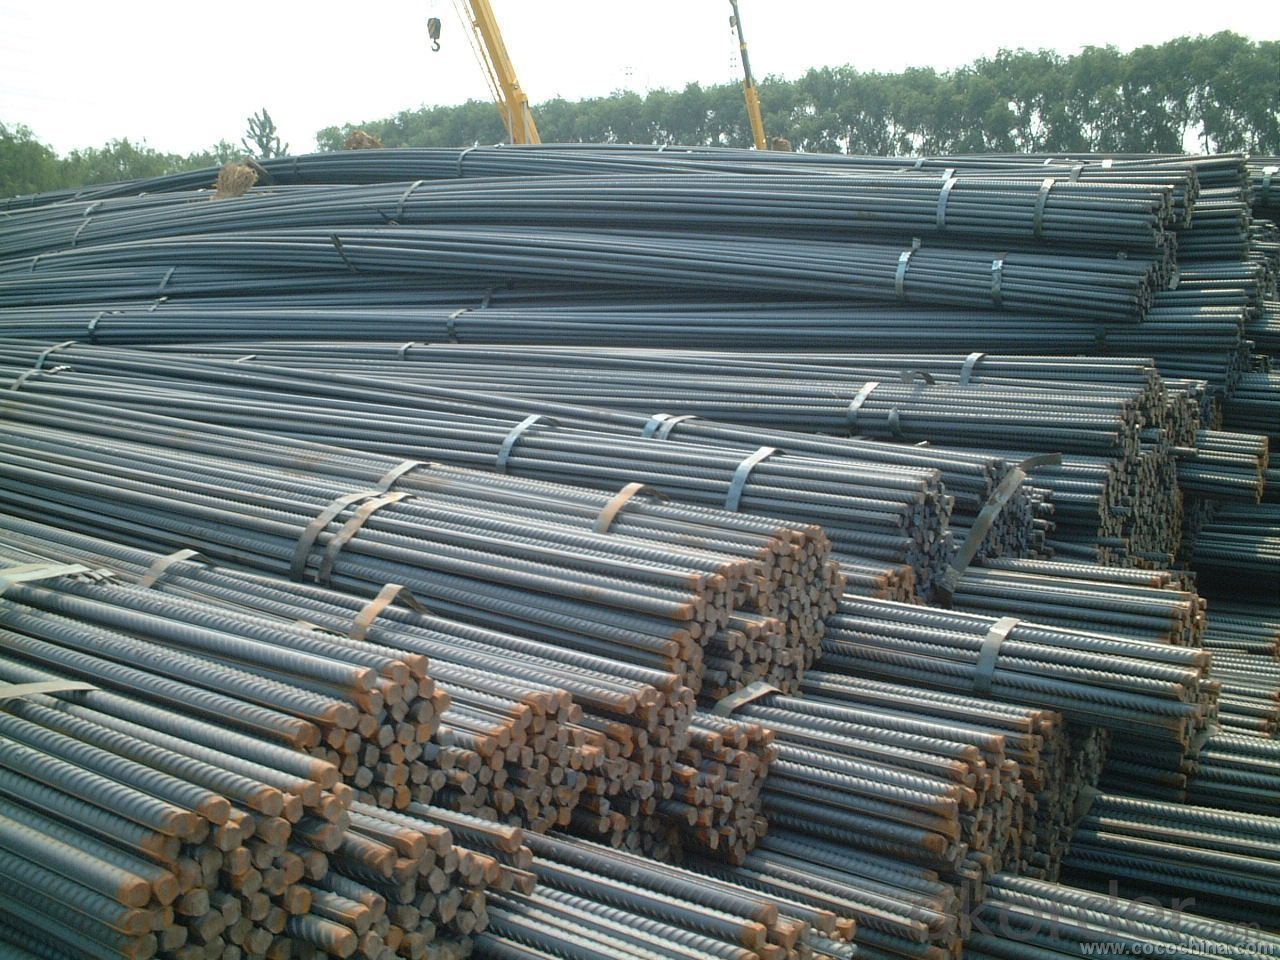 Concrete Reinforcing Steel Bar from 8mm to 40mm